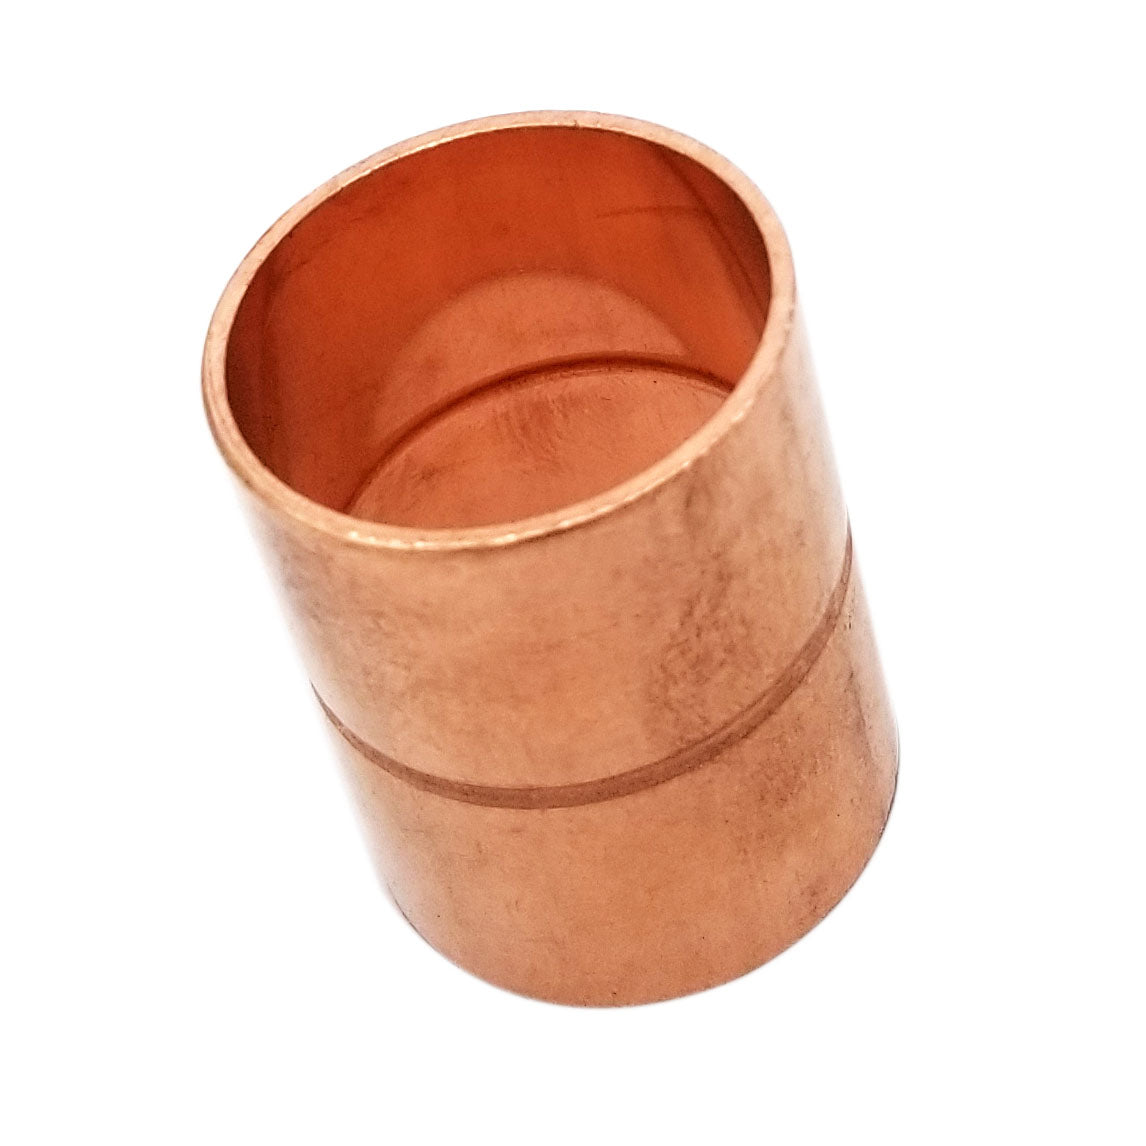 Copper Fitting 3/4 Inch (HVAC Outer Dimension) 5/8 Inch (Plumbing Inner Dimension) - Straight Copper Coupling Fittings With Rolled Tube Stop & HVAC – 99.9% Pure Copper - 10 Pack